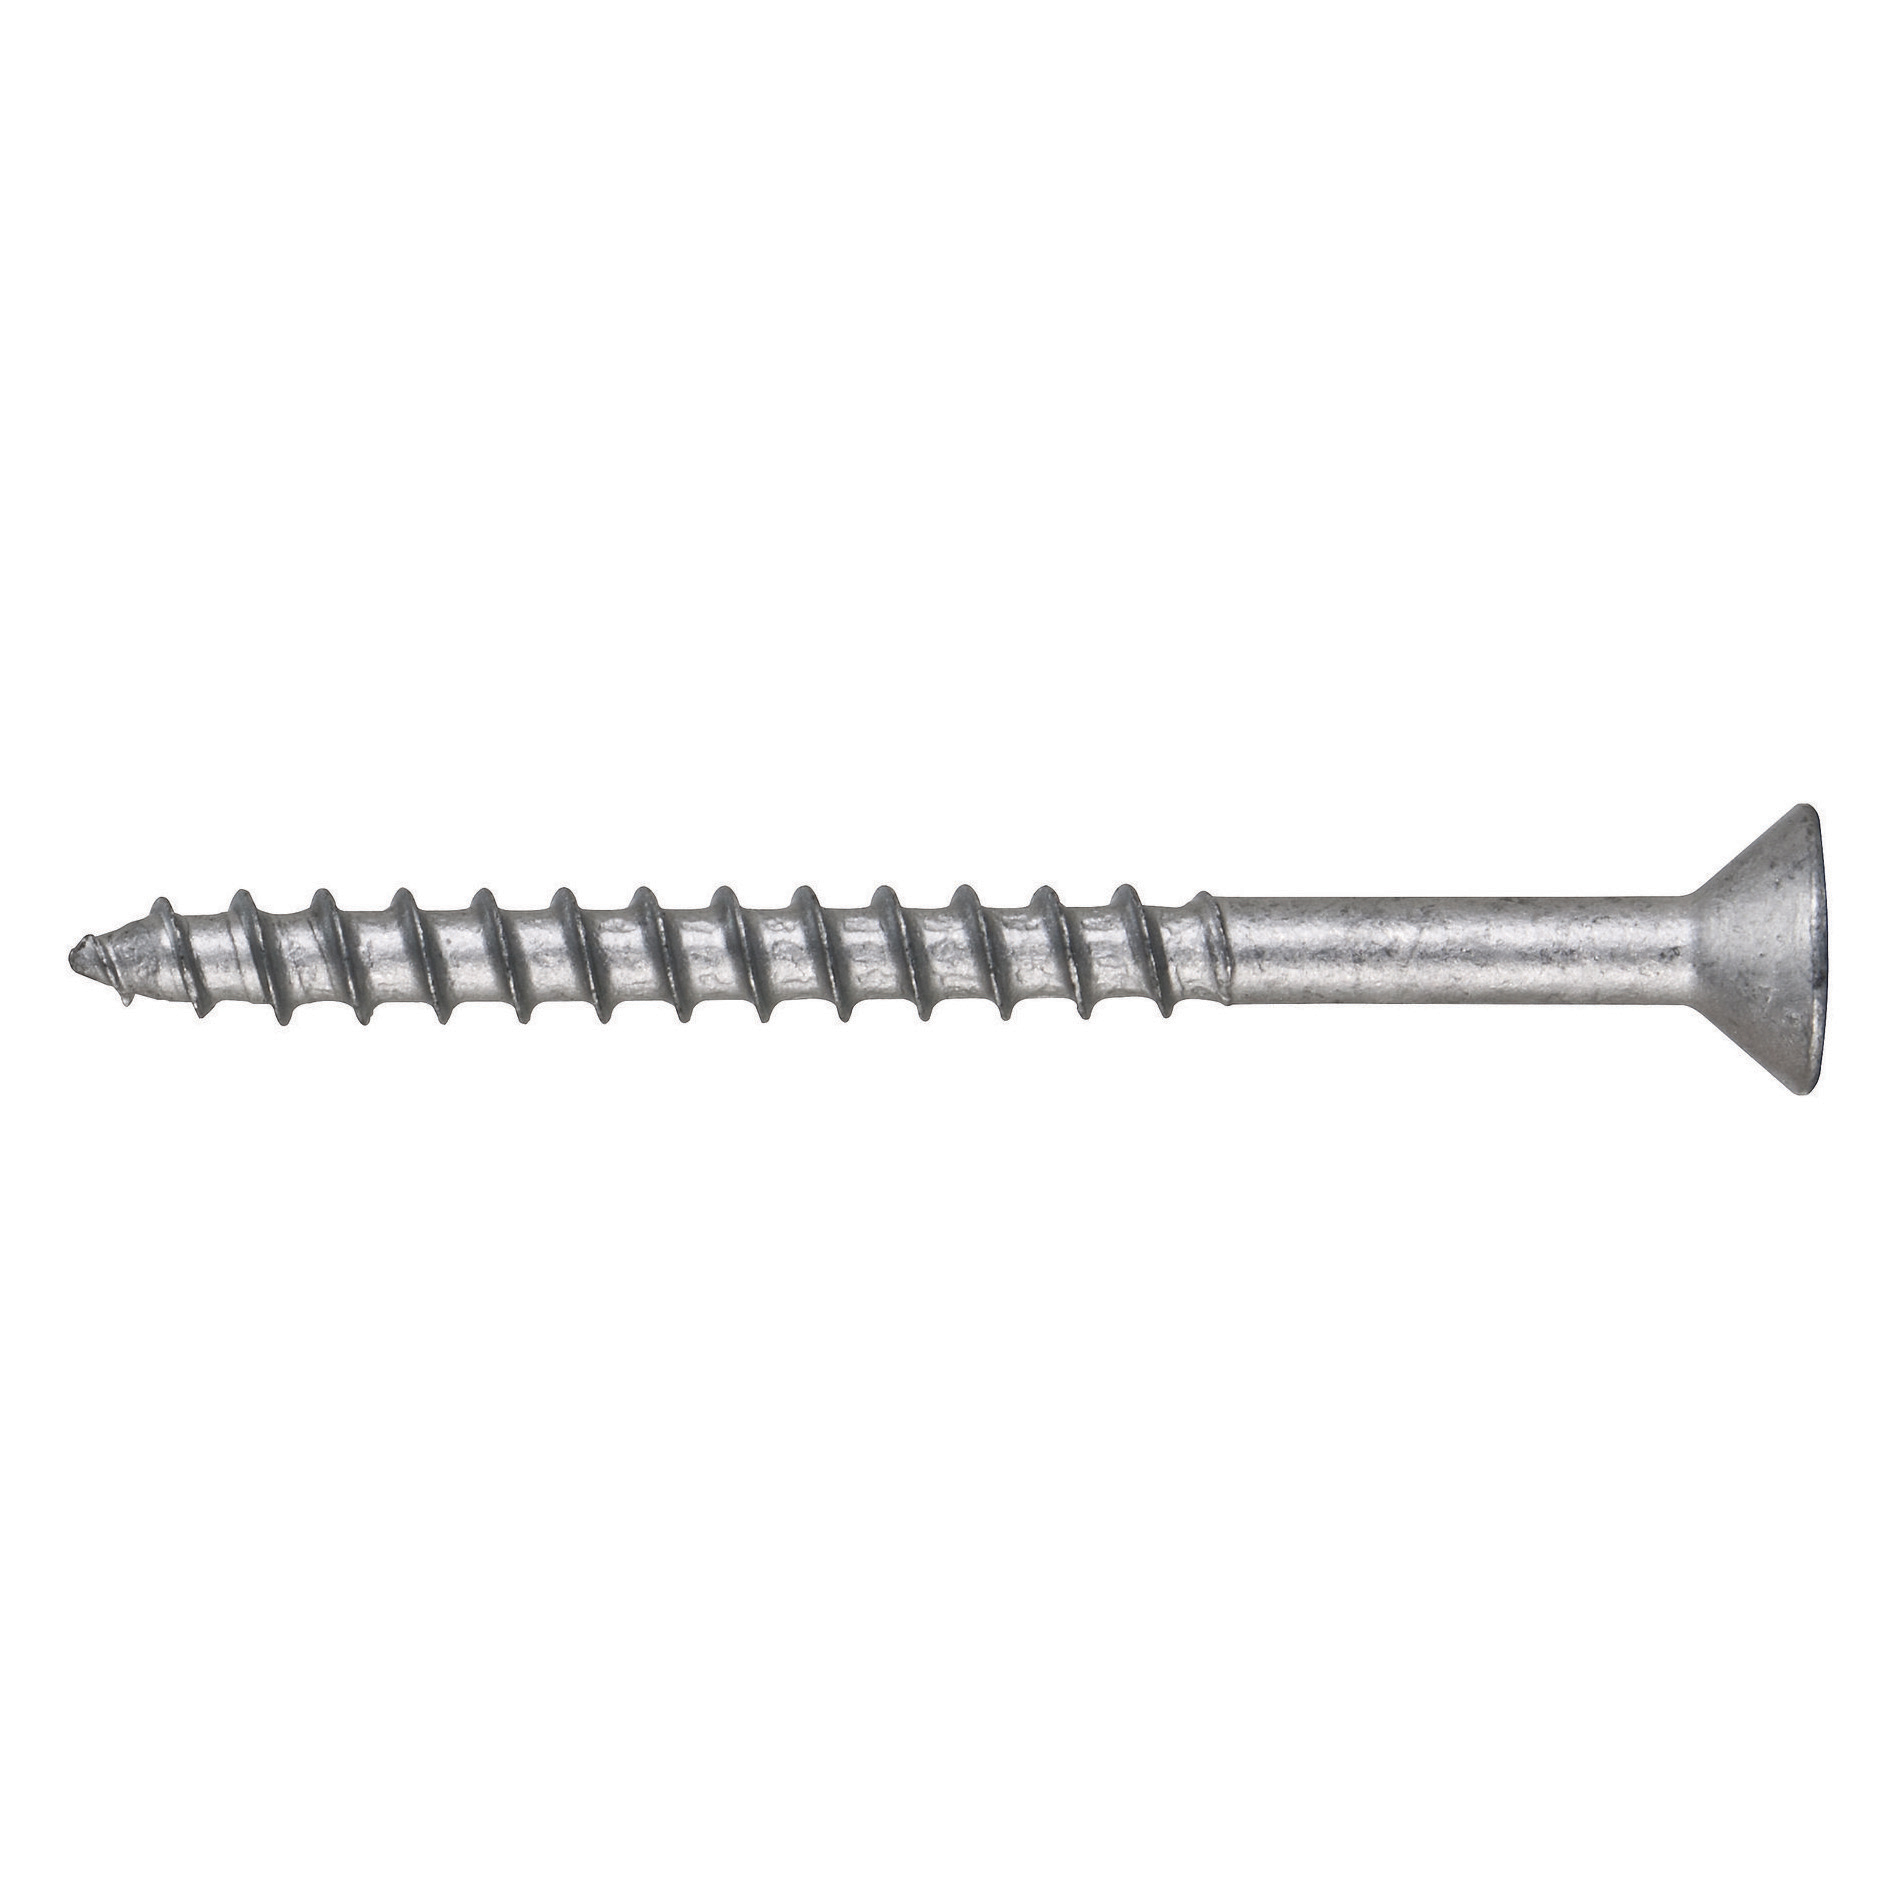 HILTI 418079 Ultimate Performance Screw Anchor, 5/8 in Dia, 4 in OAL, Hex Head Drive, Carbon Steel, 5 in D Min Embedment